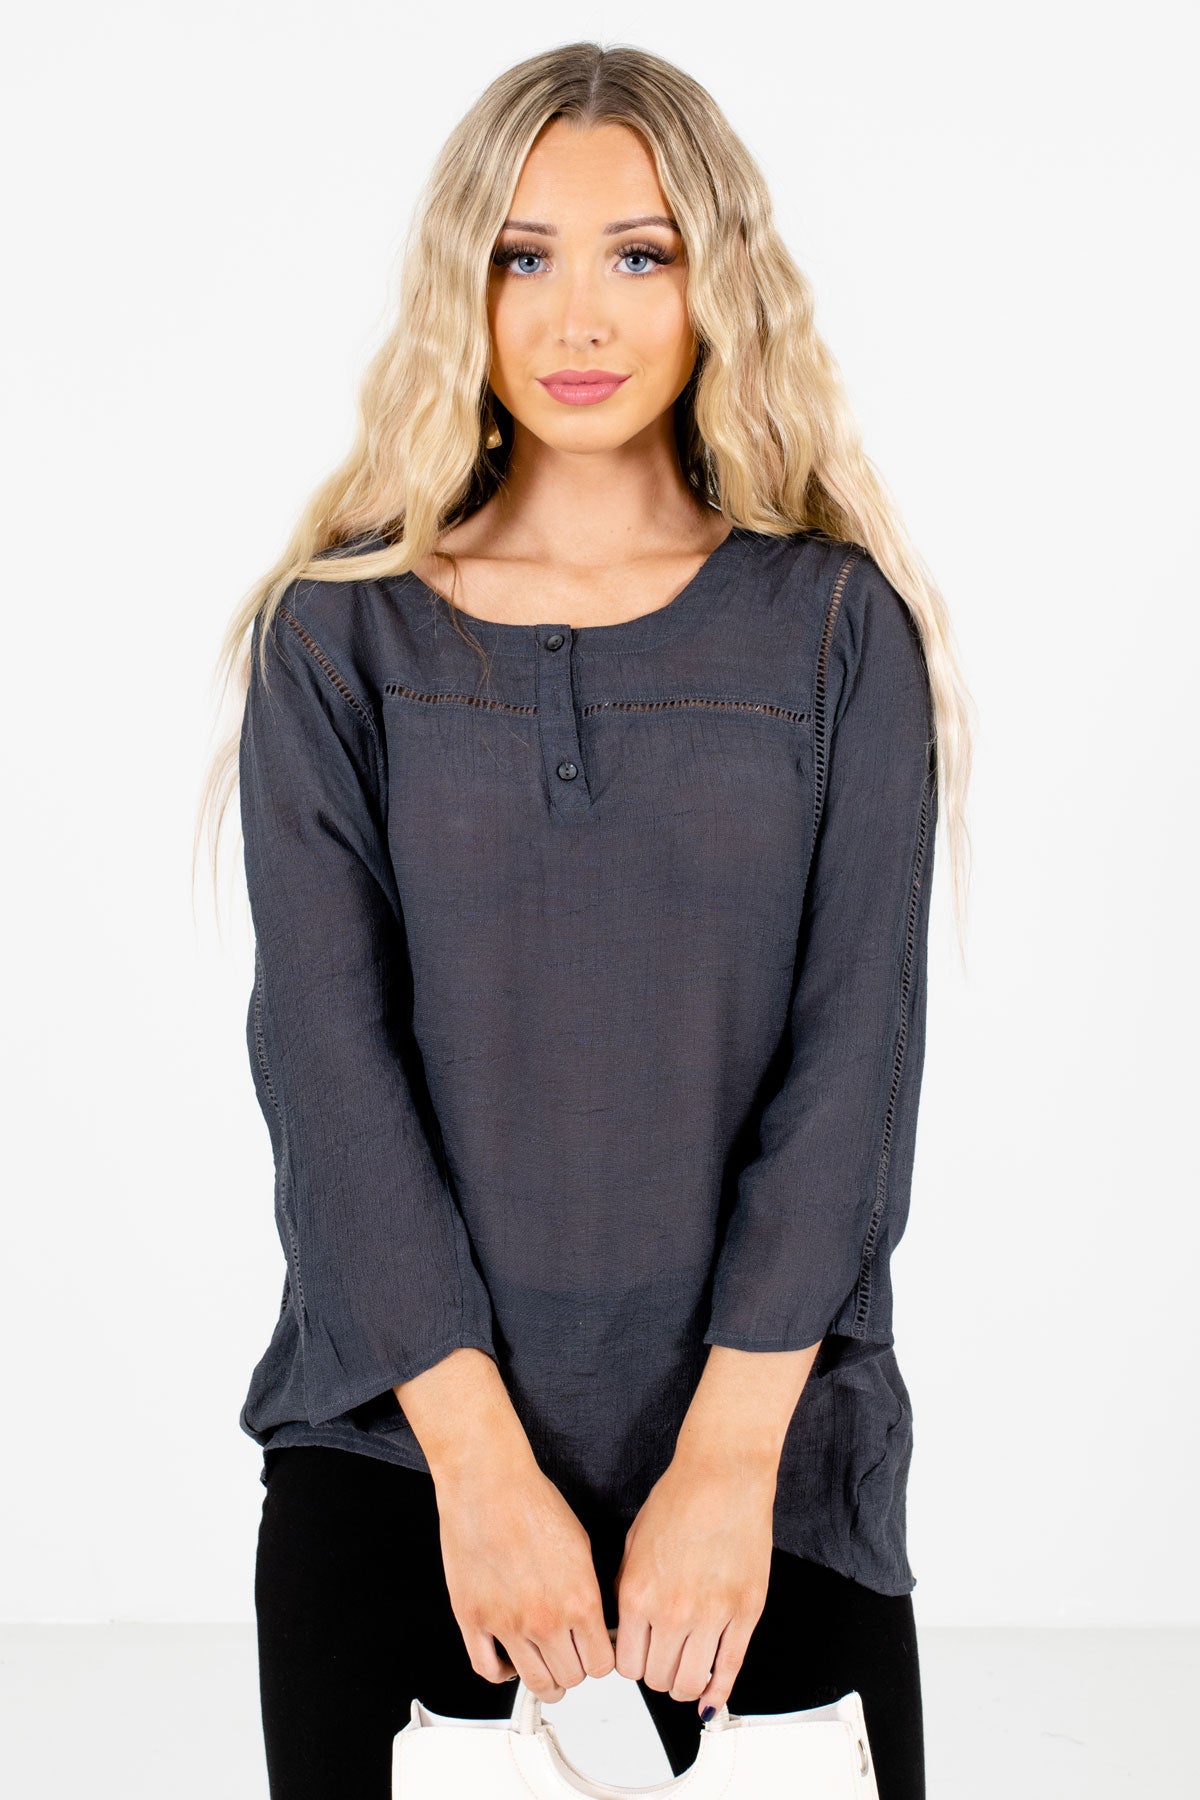 Charcoal Gray Ladder Lace Detailed Boutique Tops for Women